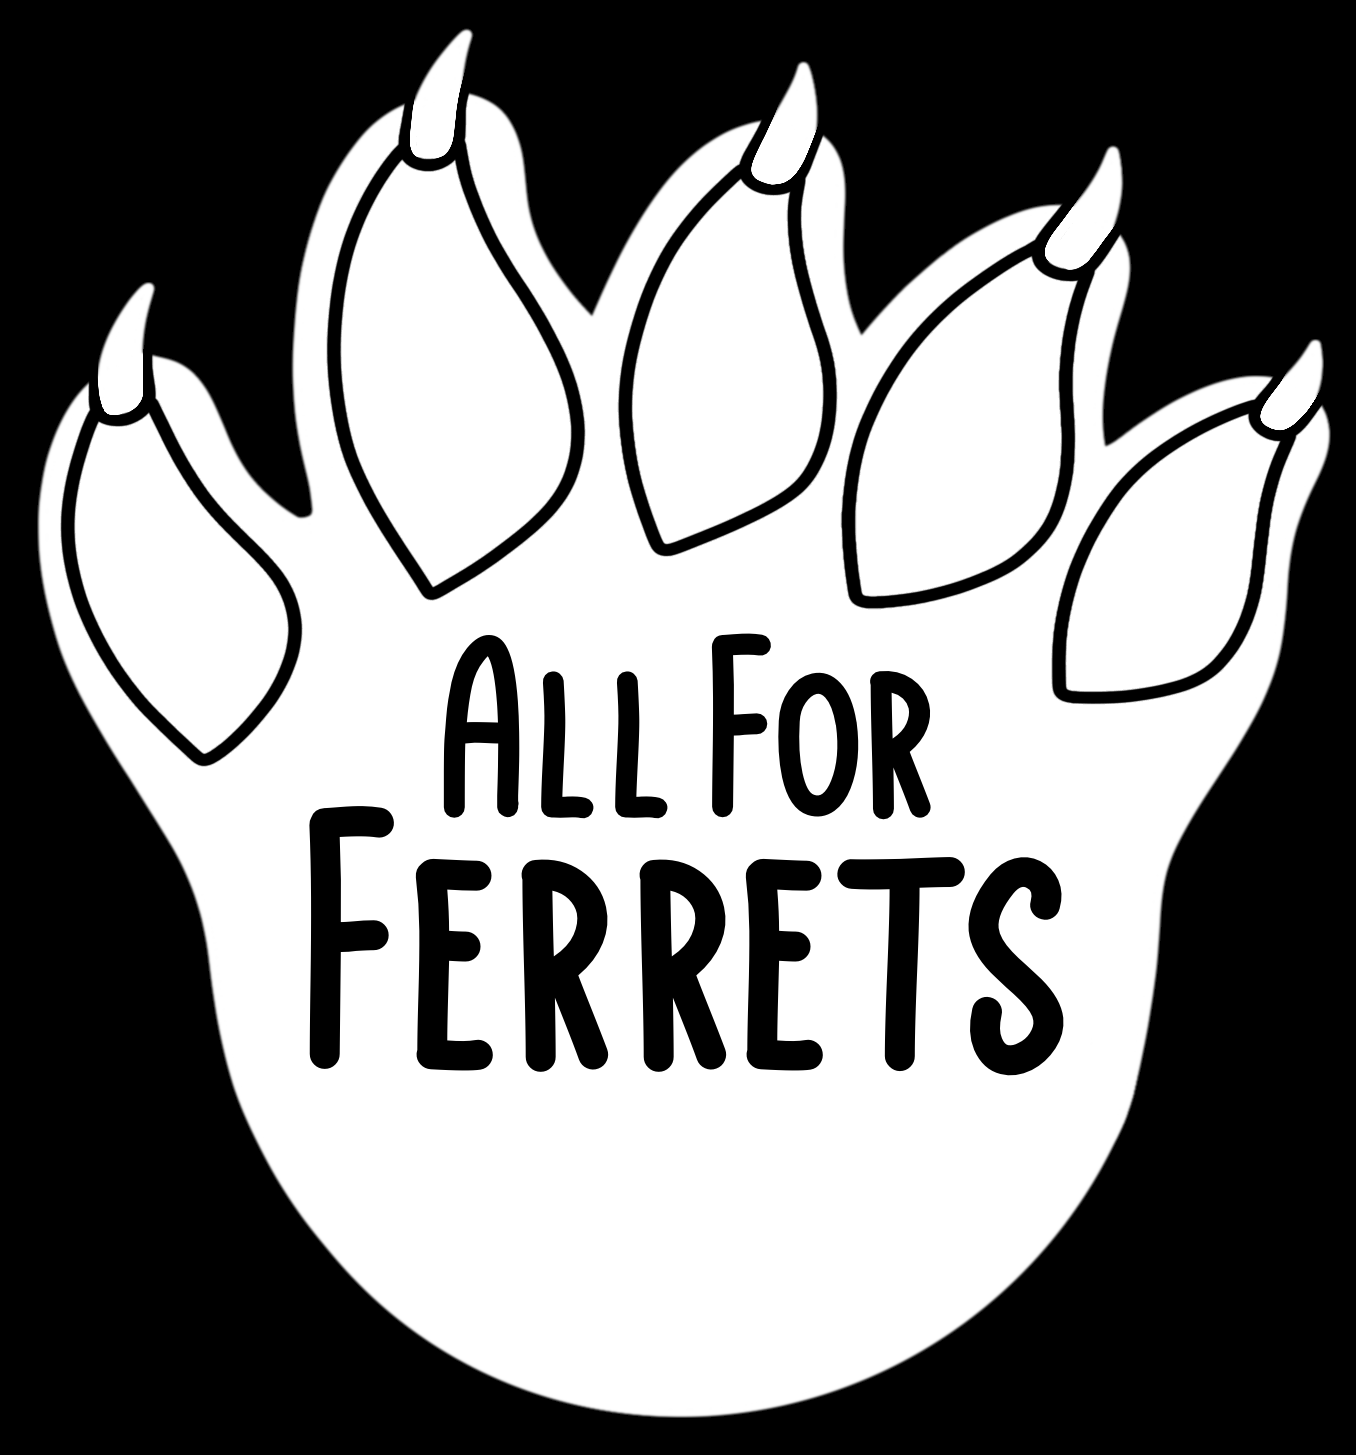 All For Ferrets